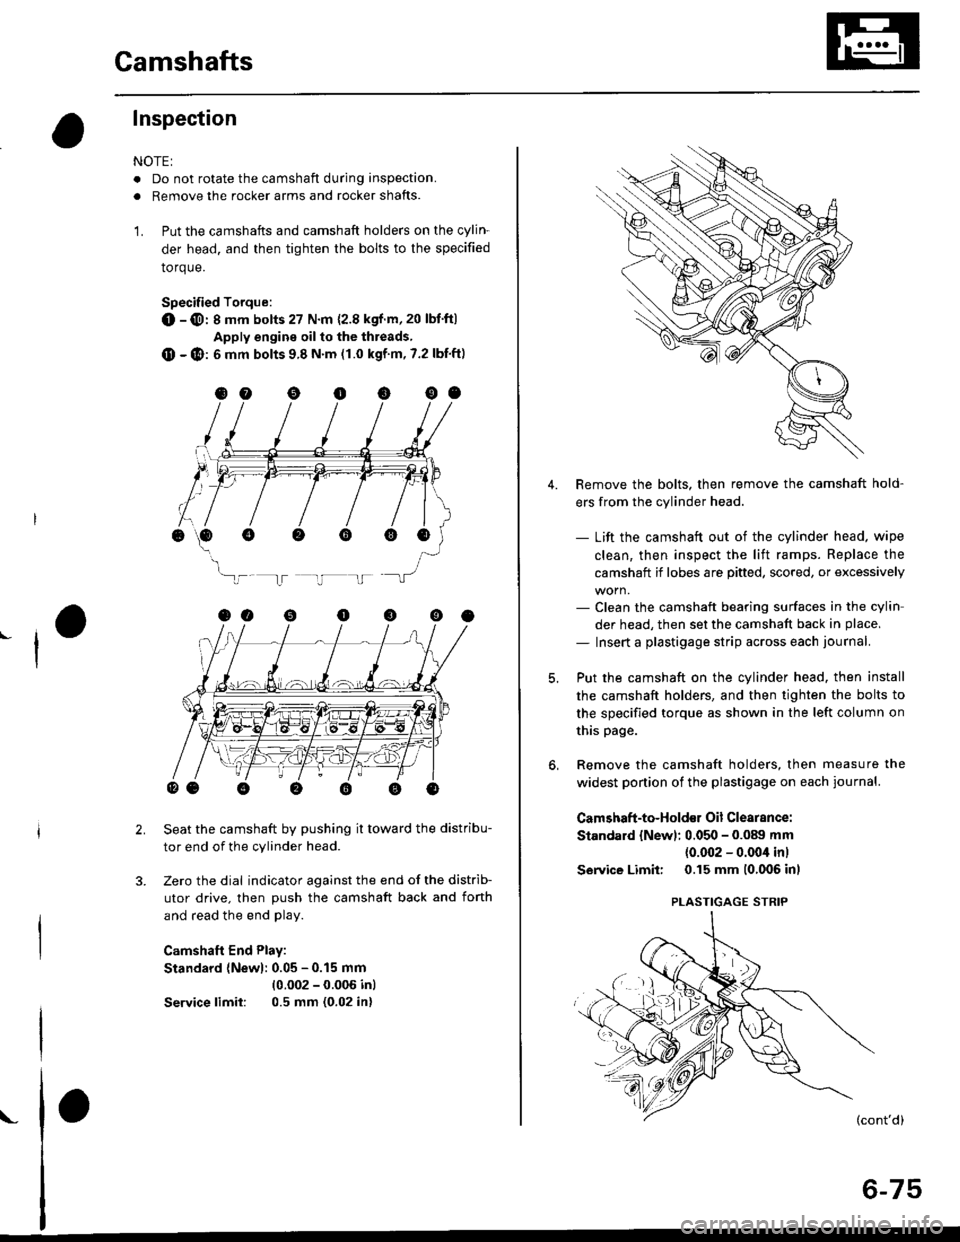 HONDA CIVIC 2000 6.G Service Manual Camshafts
Inspection
NOTE:
. Do not rotate the camshaft during inspection.
. Removg the rocker arms and rocker shafts.
L Put the camshafts and camshaft holders on the cylin-
der head. and then tighte